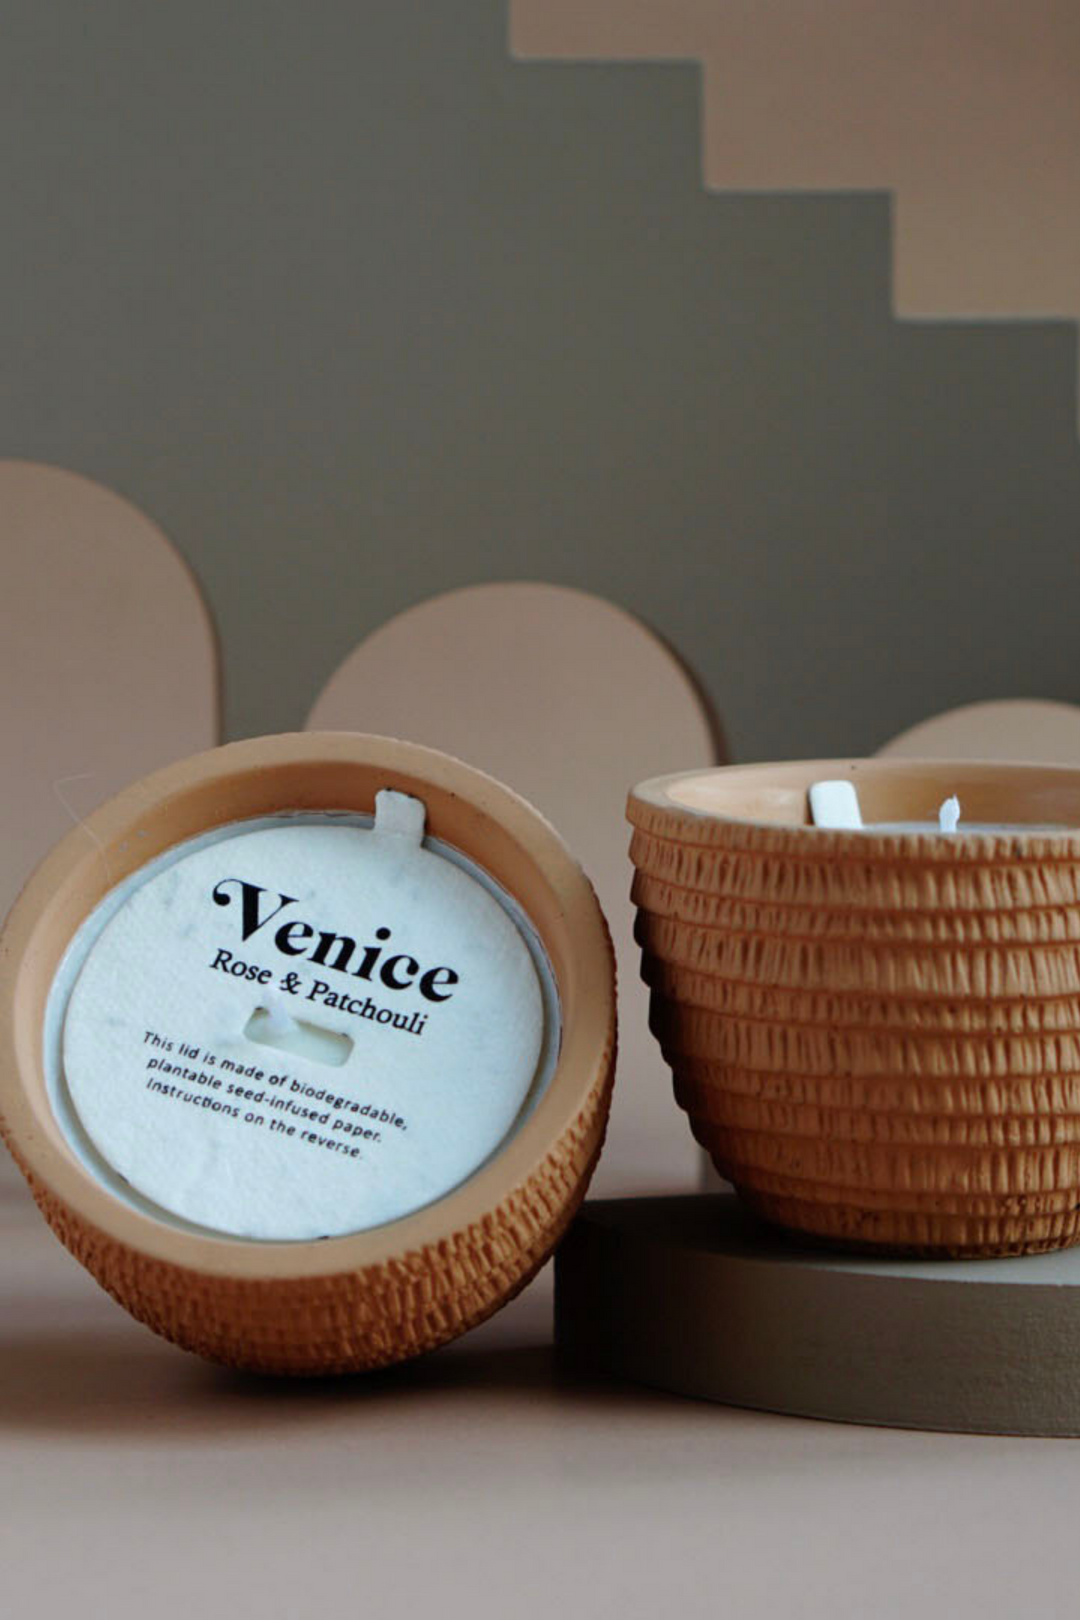 Pass It On Candle in Venice (Rose & Patchouli), available on ZERRIN